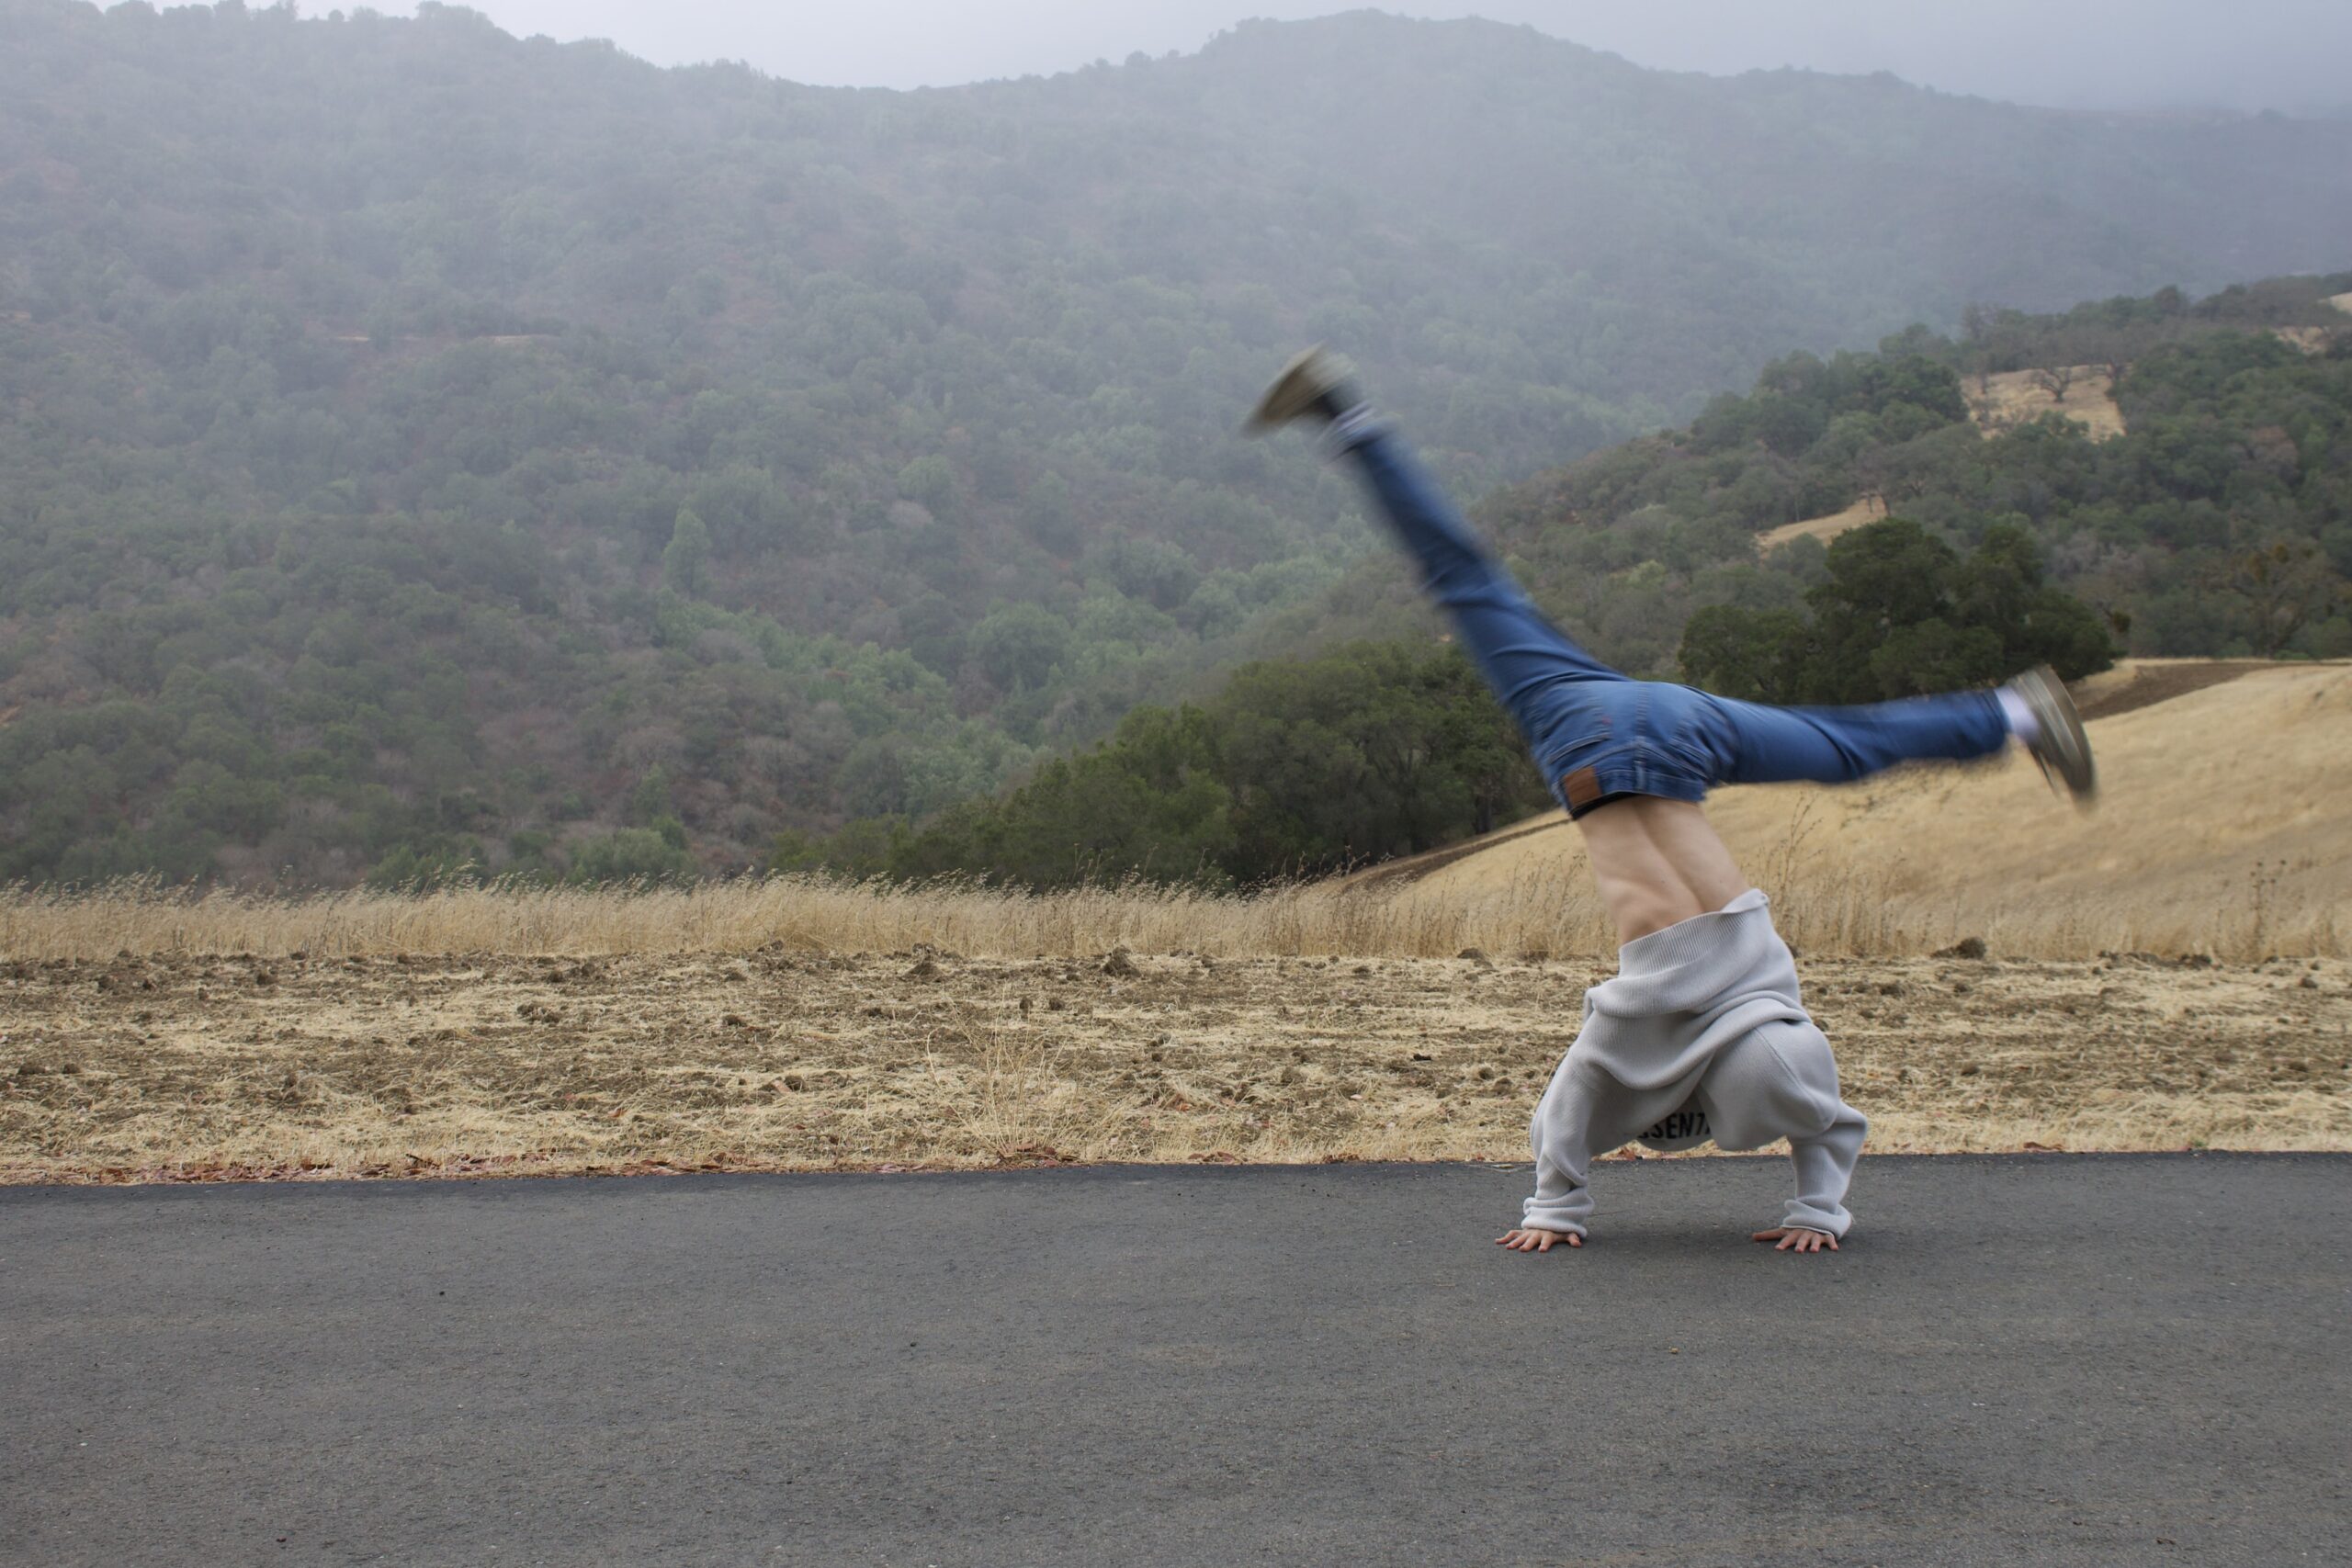 My friend is doing a cartwheel while following the rule of thirds